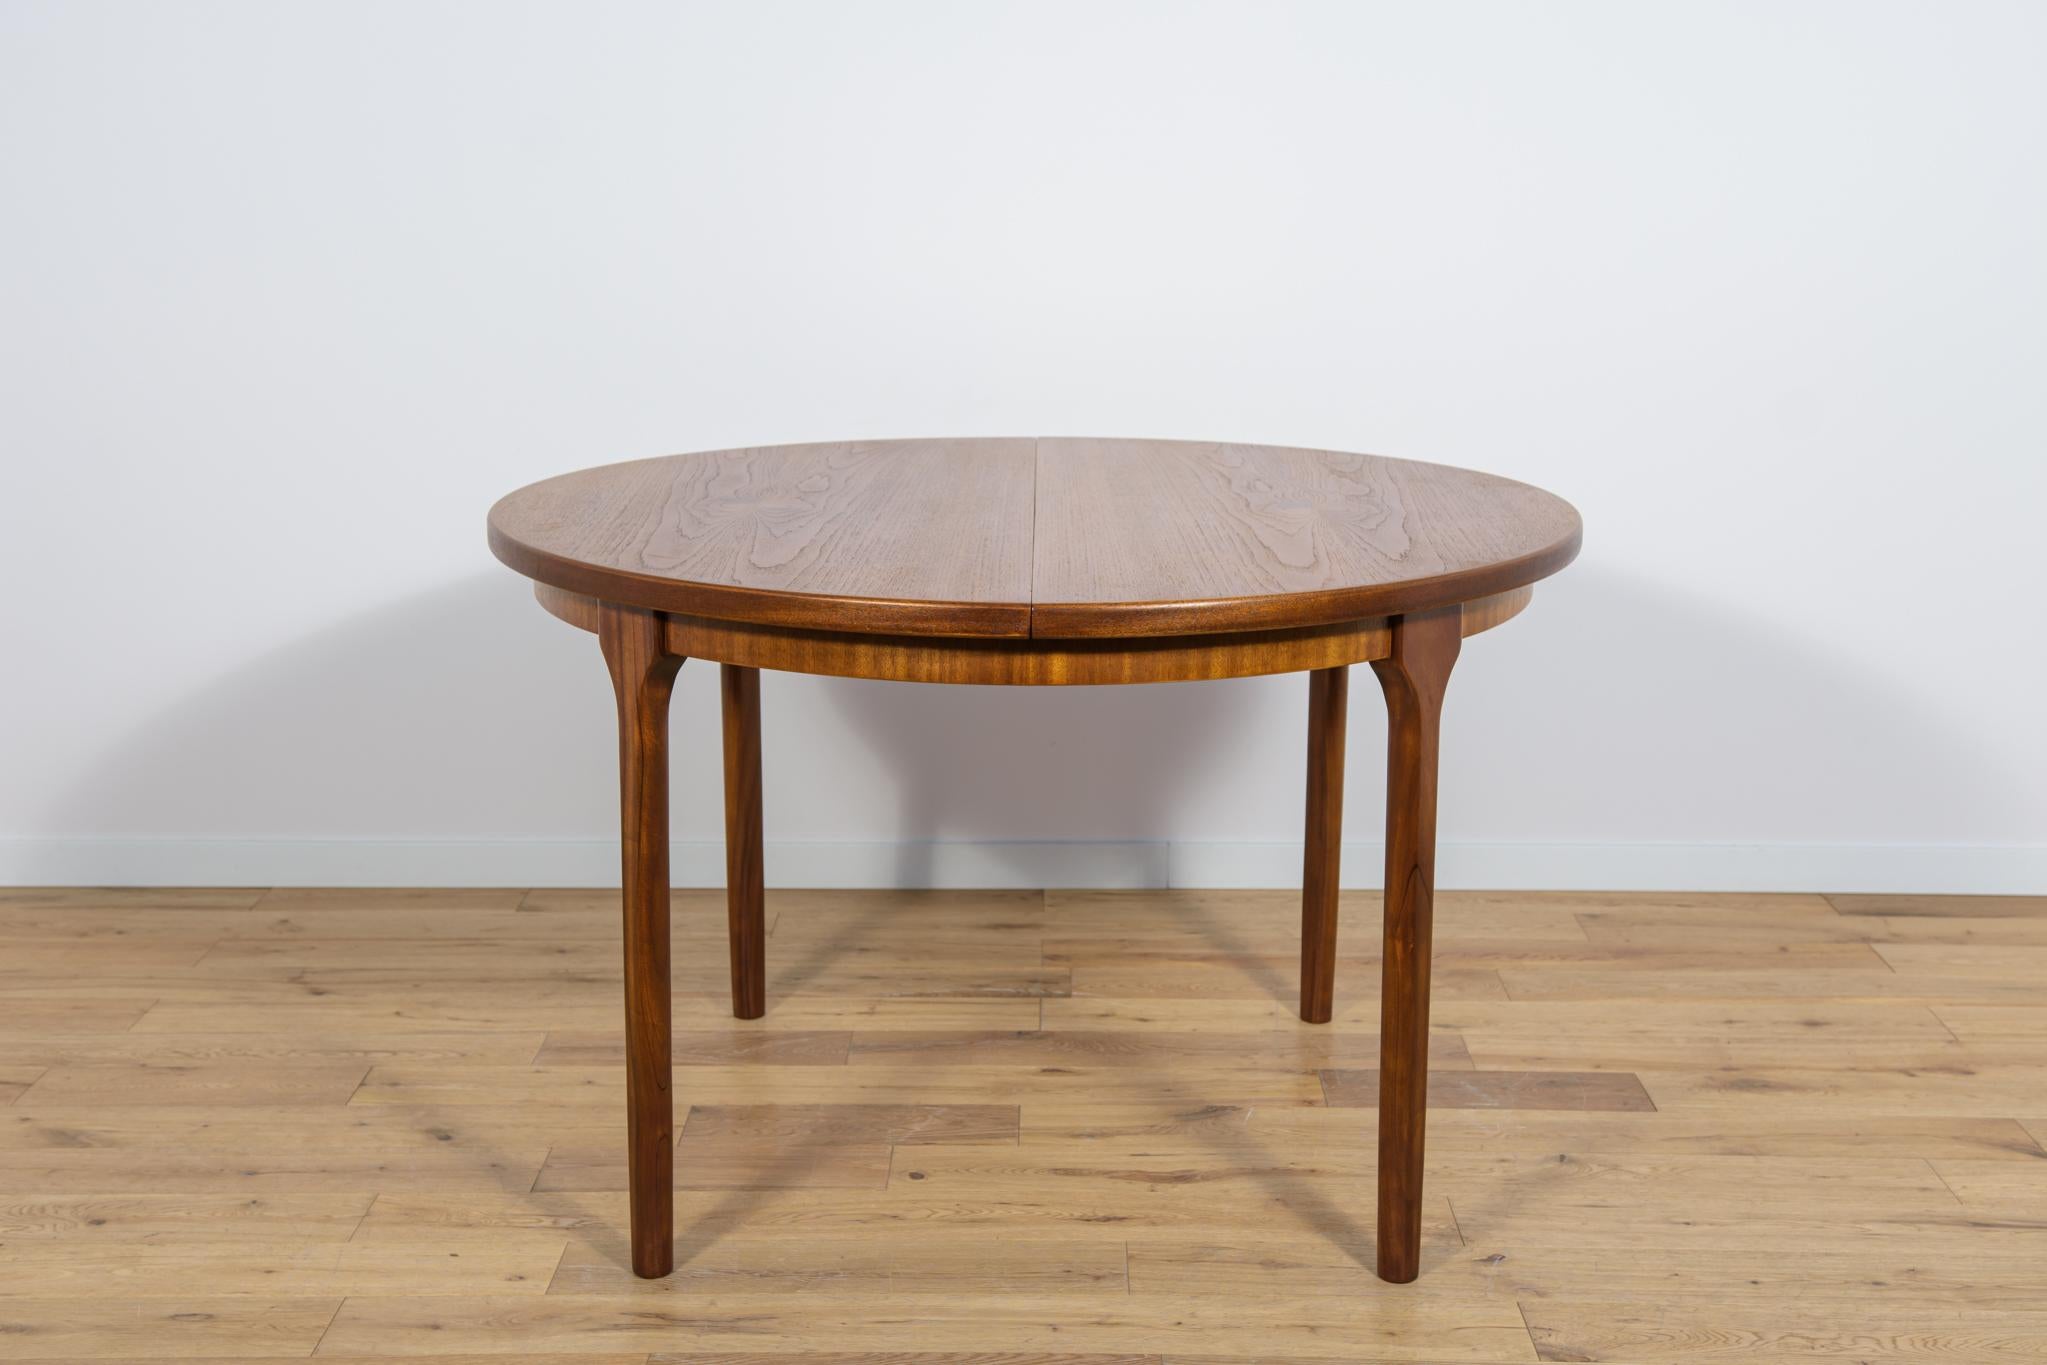 This round extendable dining table was produced by McIntosh in the 1960s. The table has profiled legs that give it a unique character and elegance. Teak elements cleaned from the old surface and painted in an oak stain and finished with quality